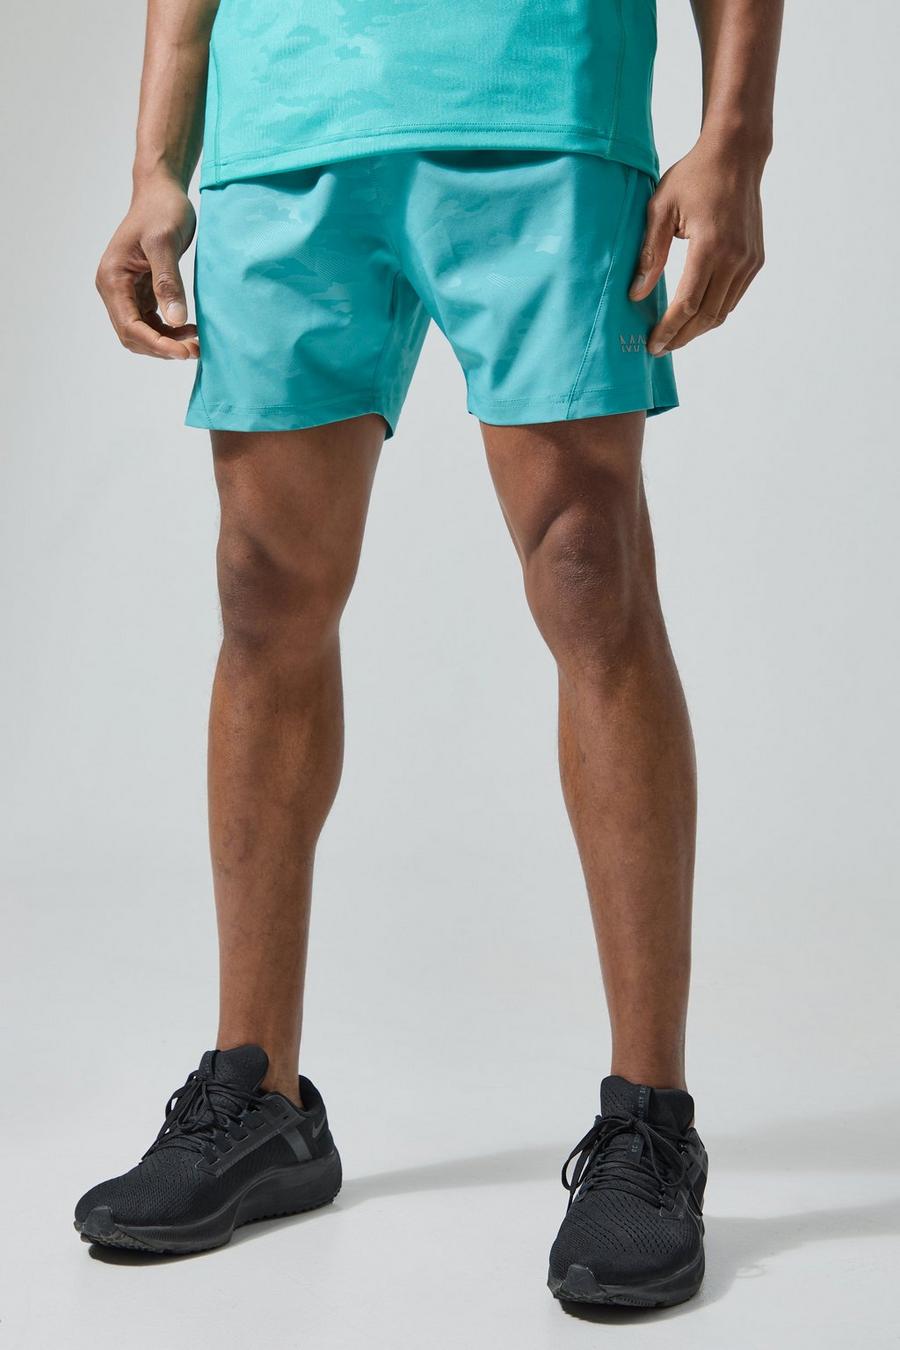 Man Active 5 Inch Camouflage Shorts, Teal